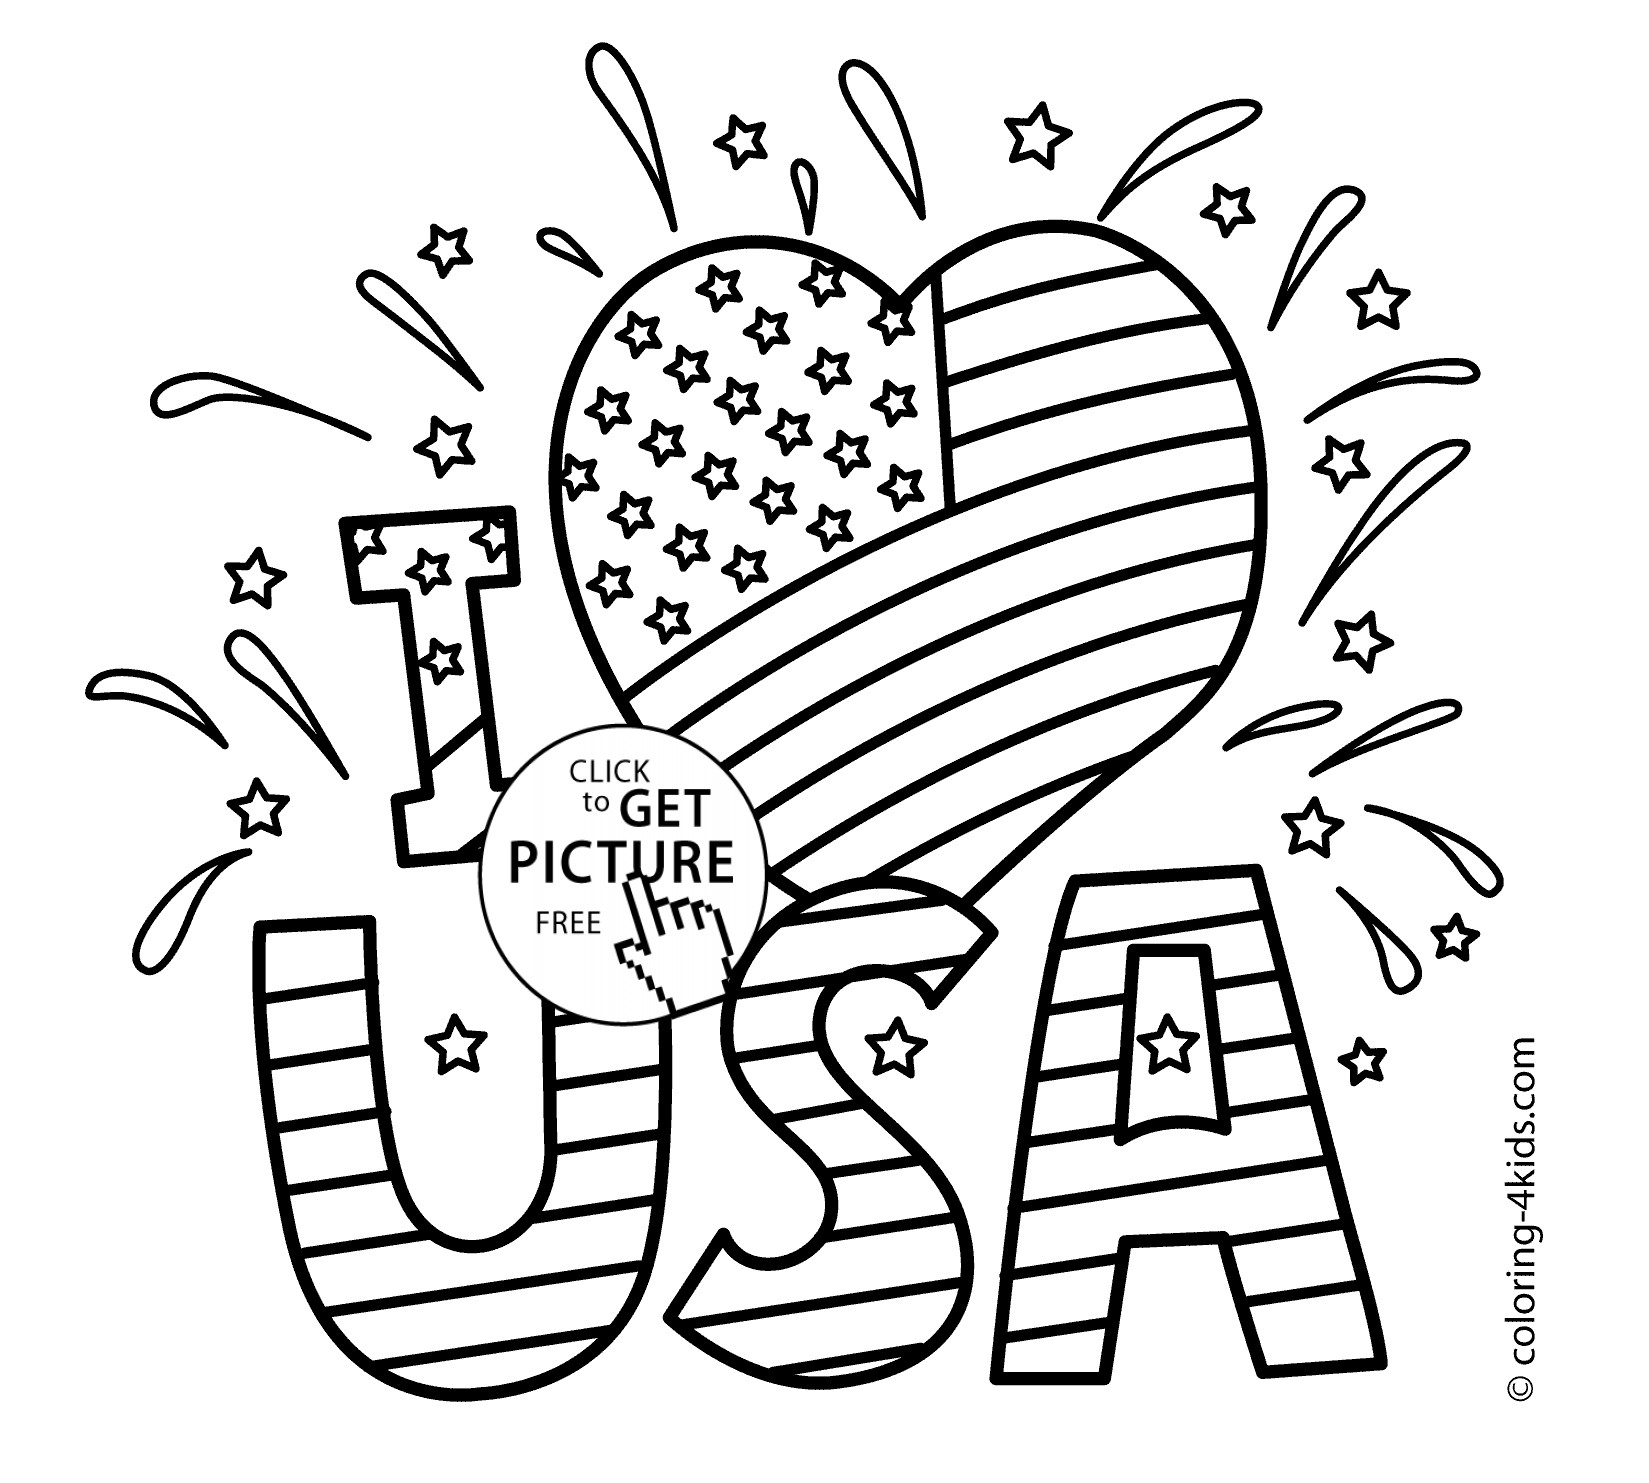 I Love Usa Coloring Pages
 I love USA coloring pages July 4 independence day